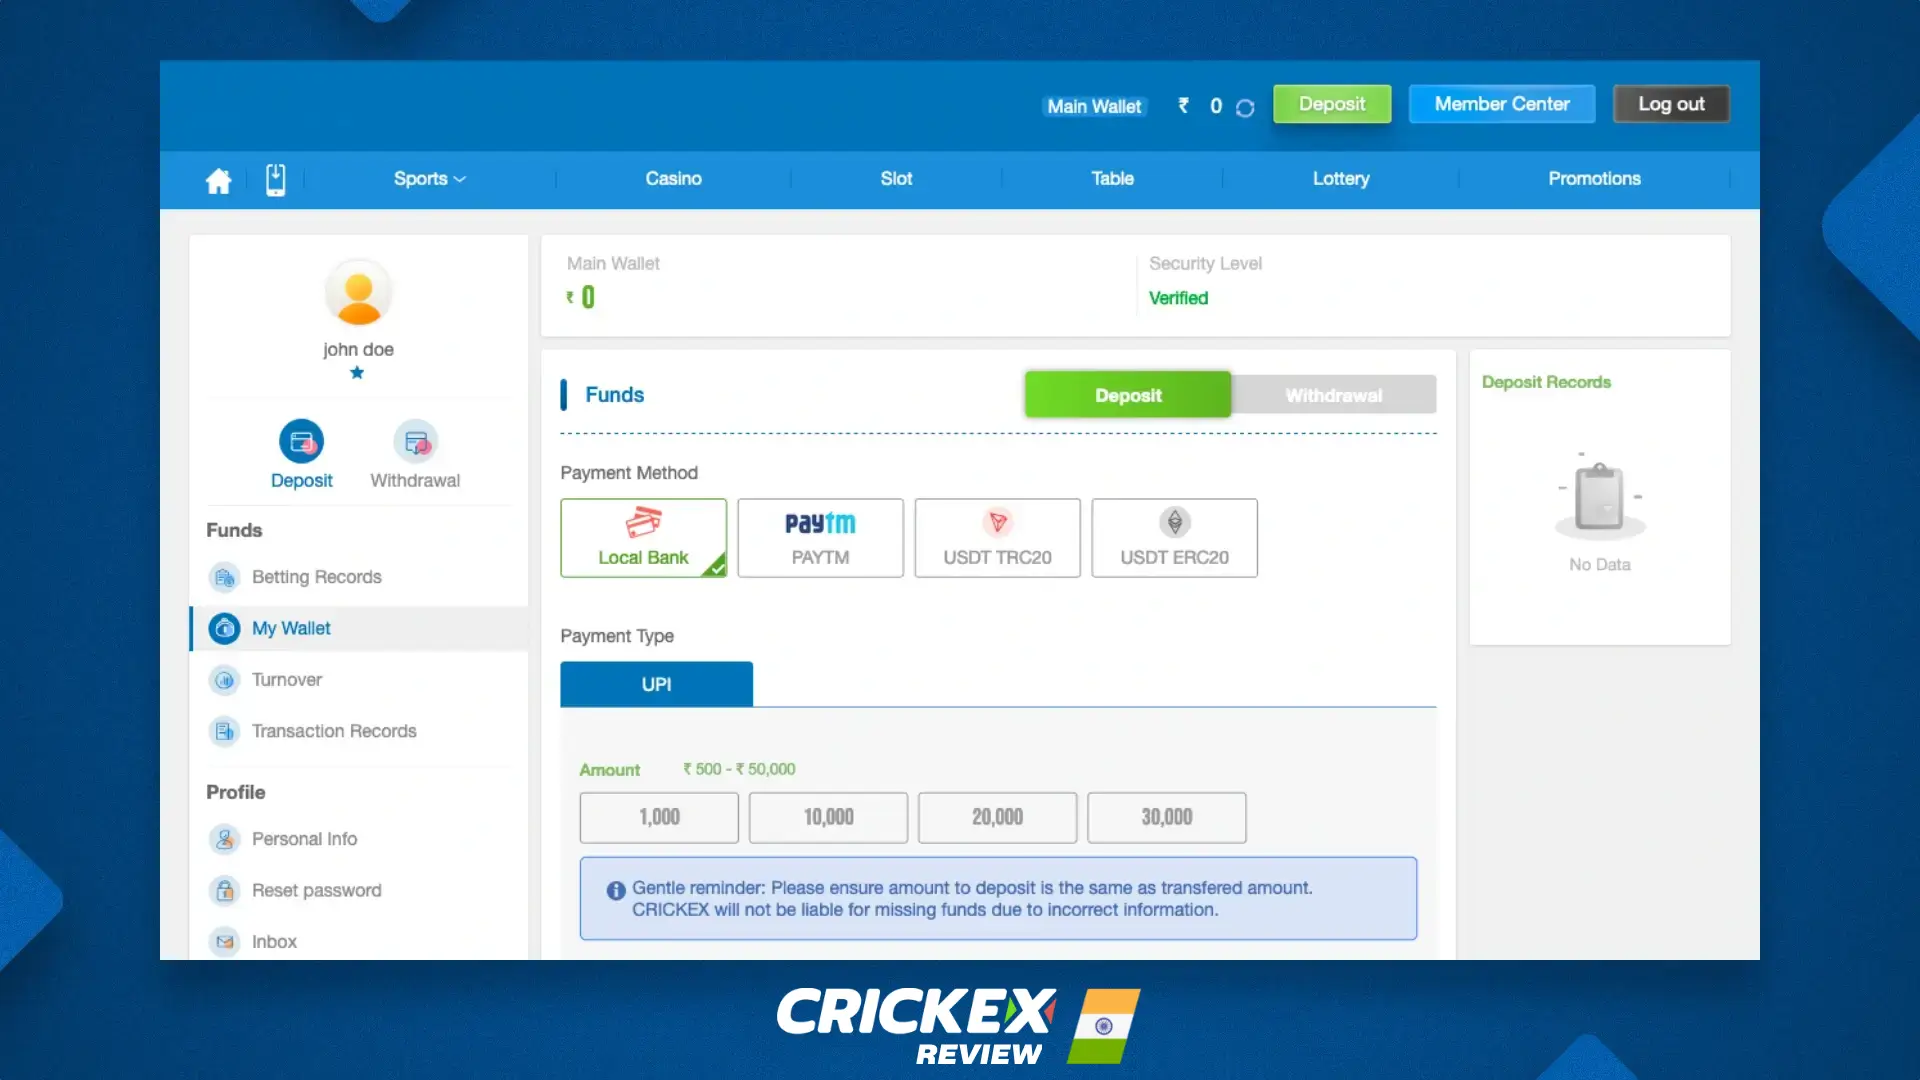 Payment methods available at Crickex, including paytm, usdt, local bank